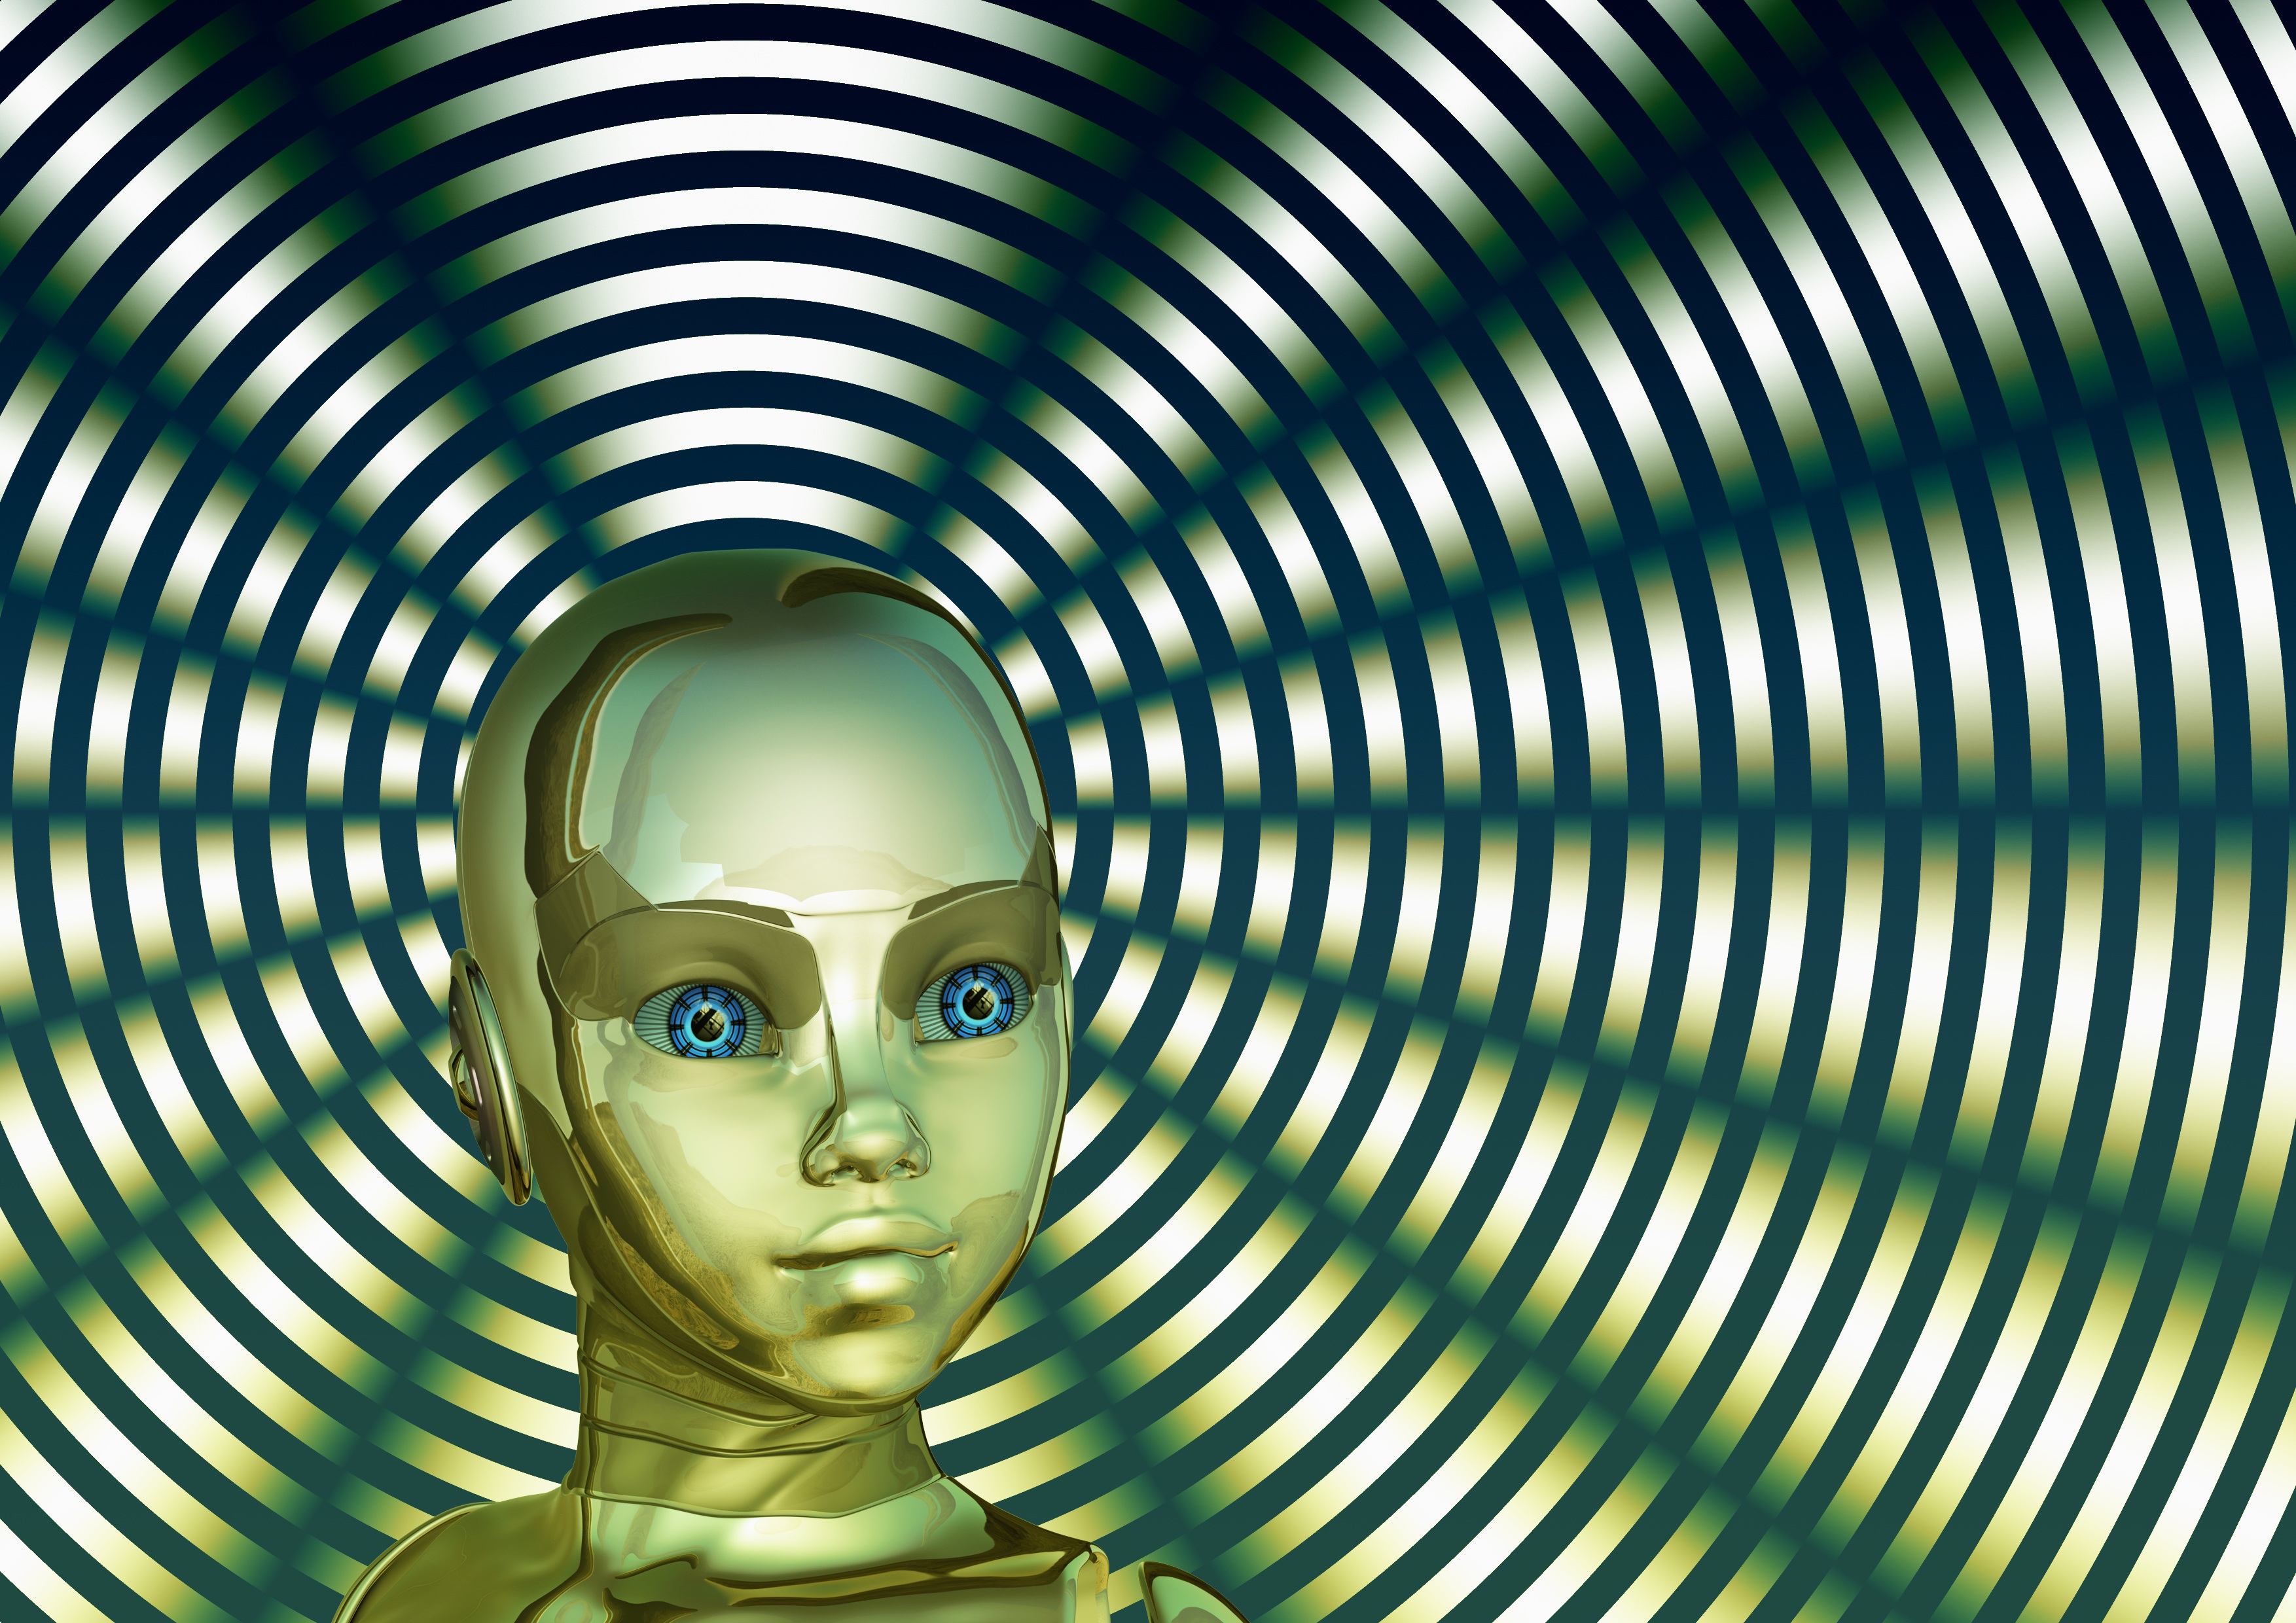 3d, gold, circles, nice, sweetheart, robot, golden, face wallpapers for tablet